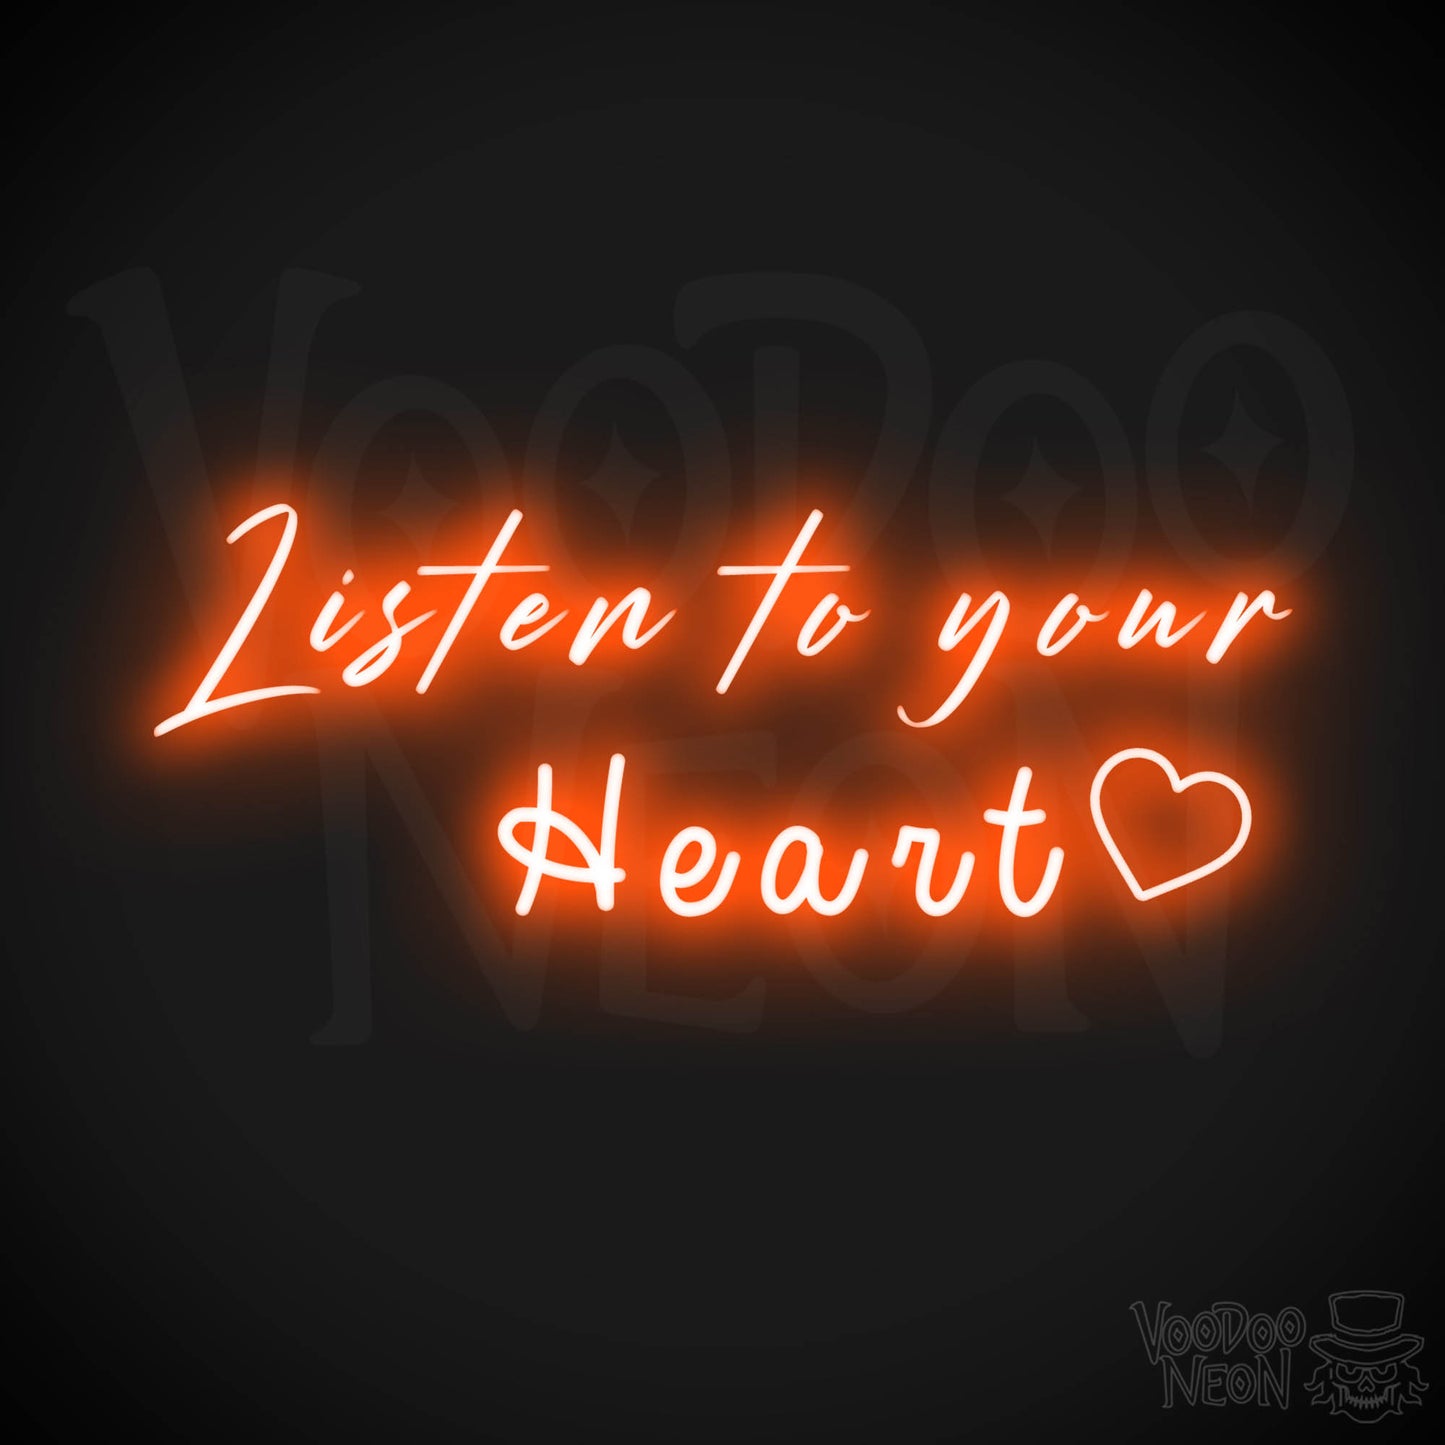 Listen To Your Heart Neon Sign - Neon Listen To Your Heart Sign - Wedding Sign - Color Orange